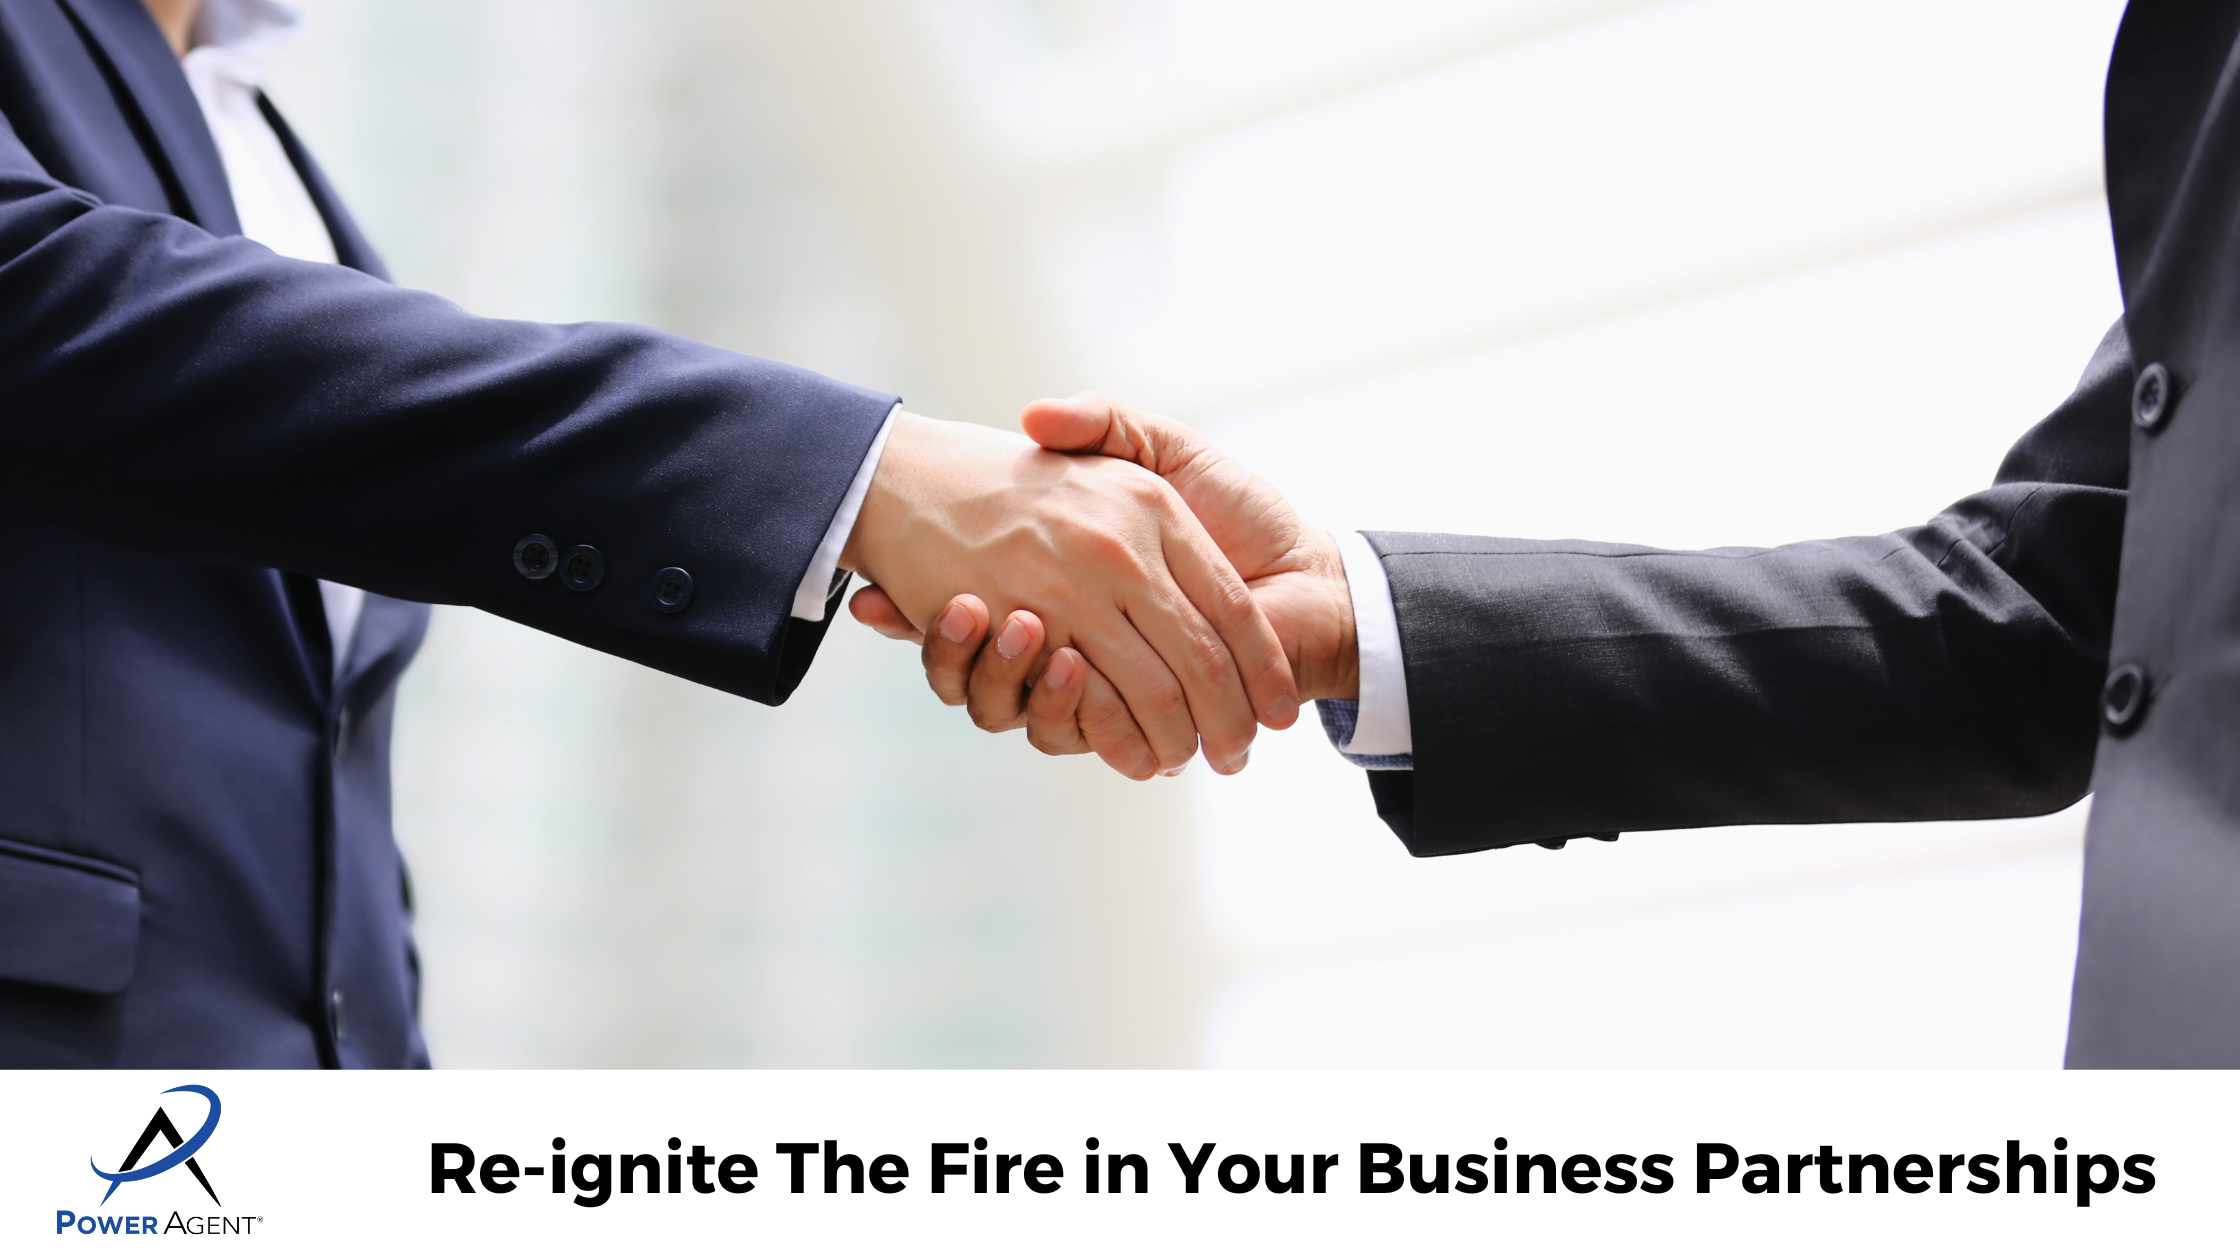 Re-ignite The Fire in Your Business Partnerships